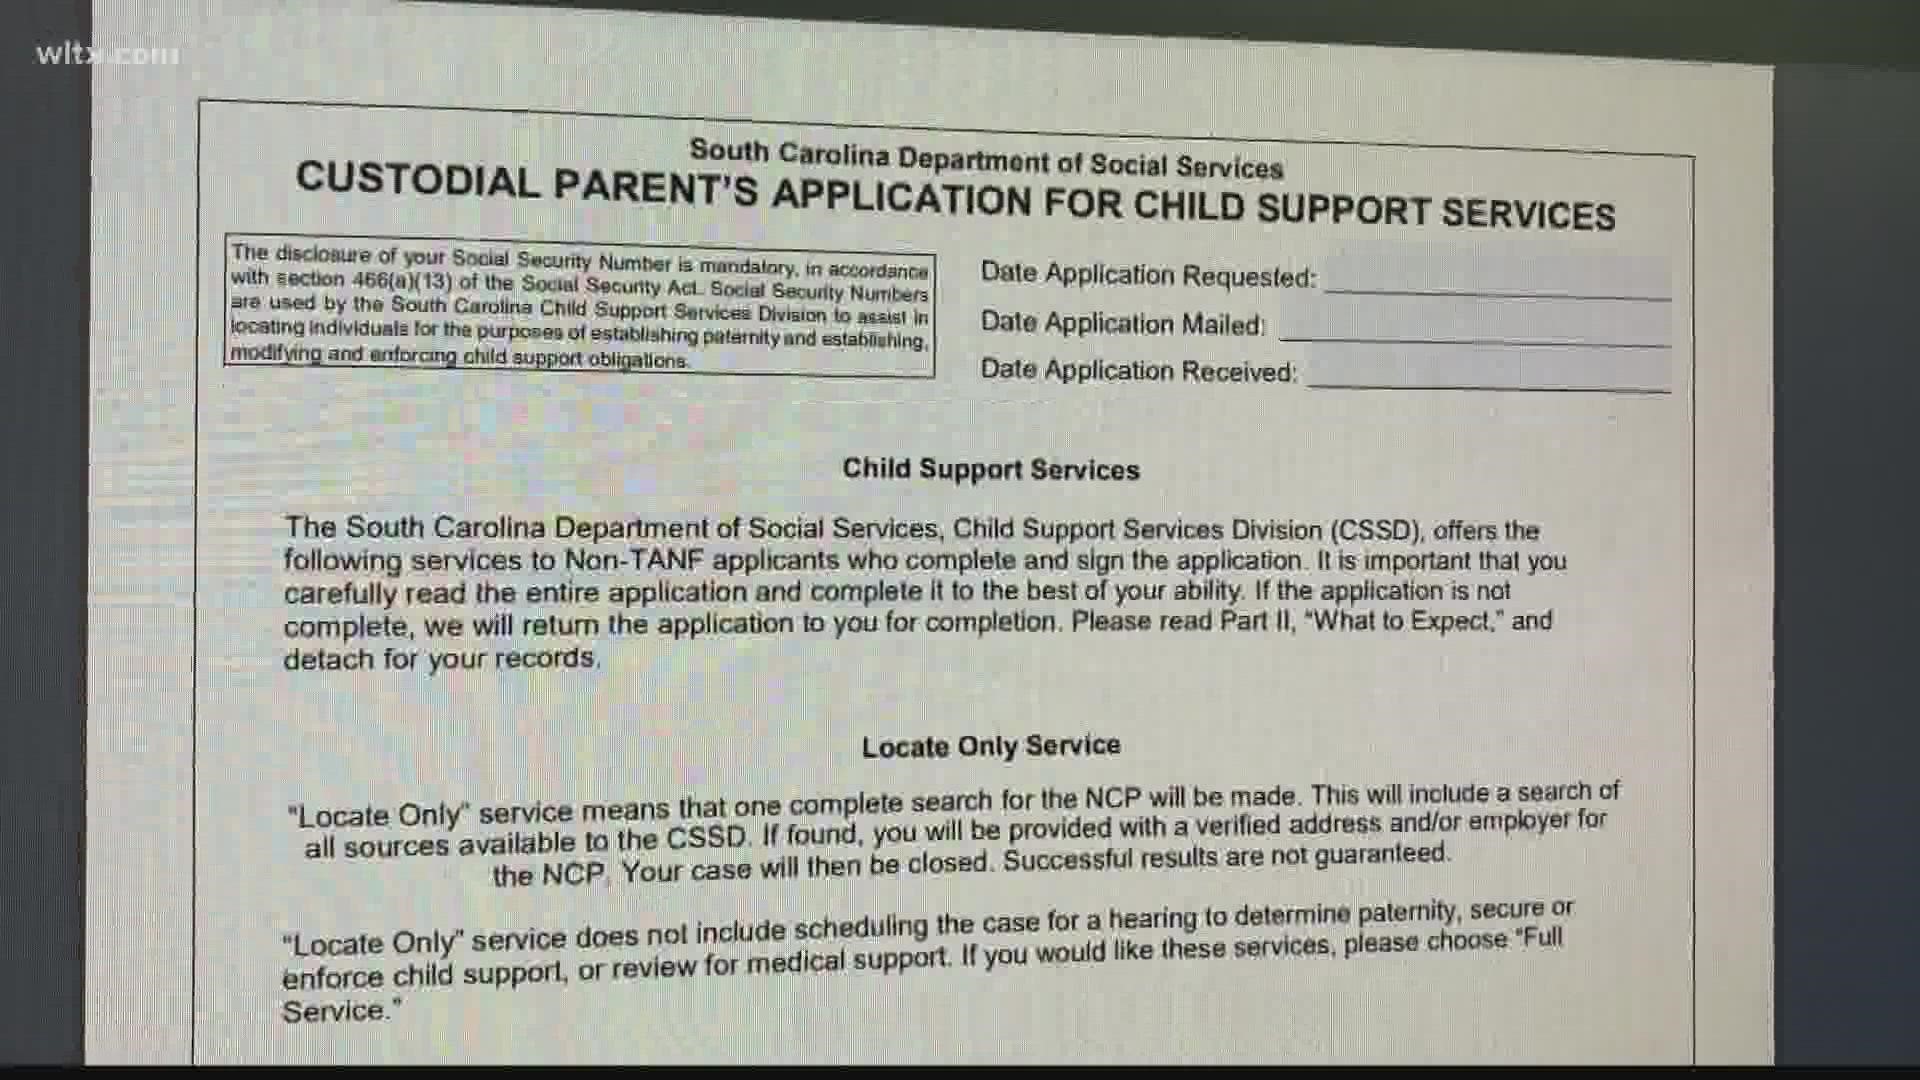 The S.C. Department of Social Services (DSS) has launched an online child support application process.